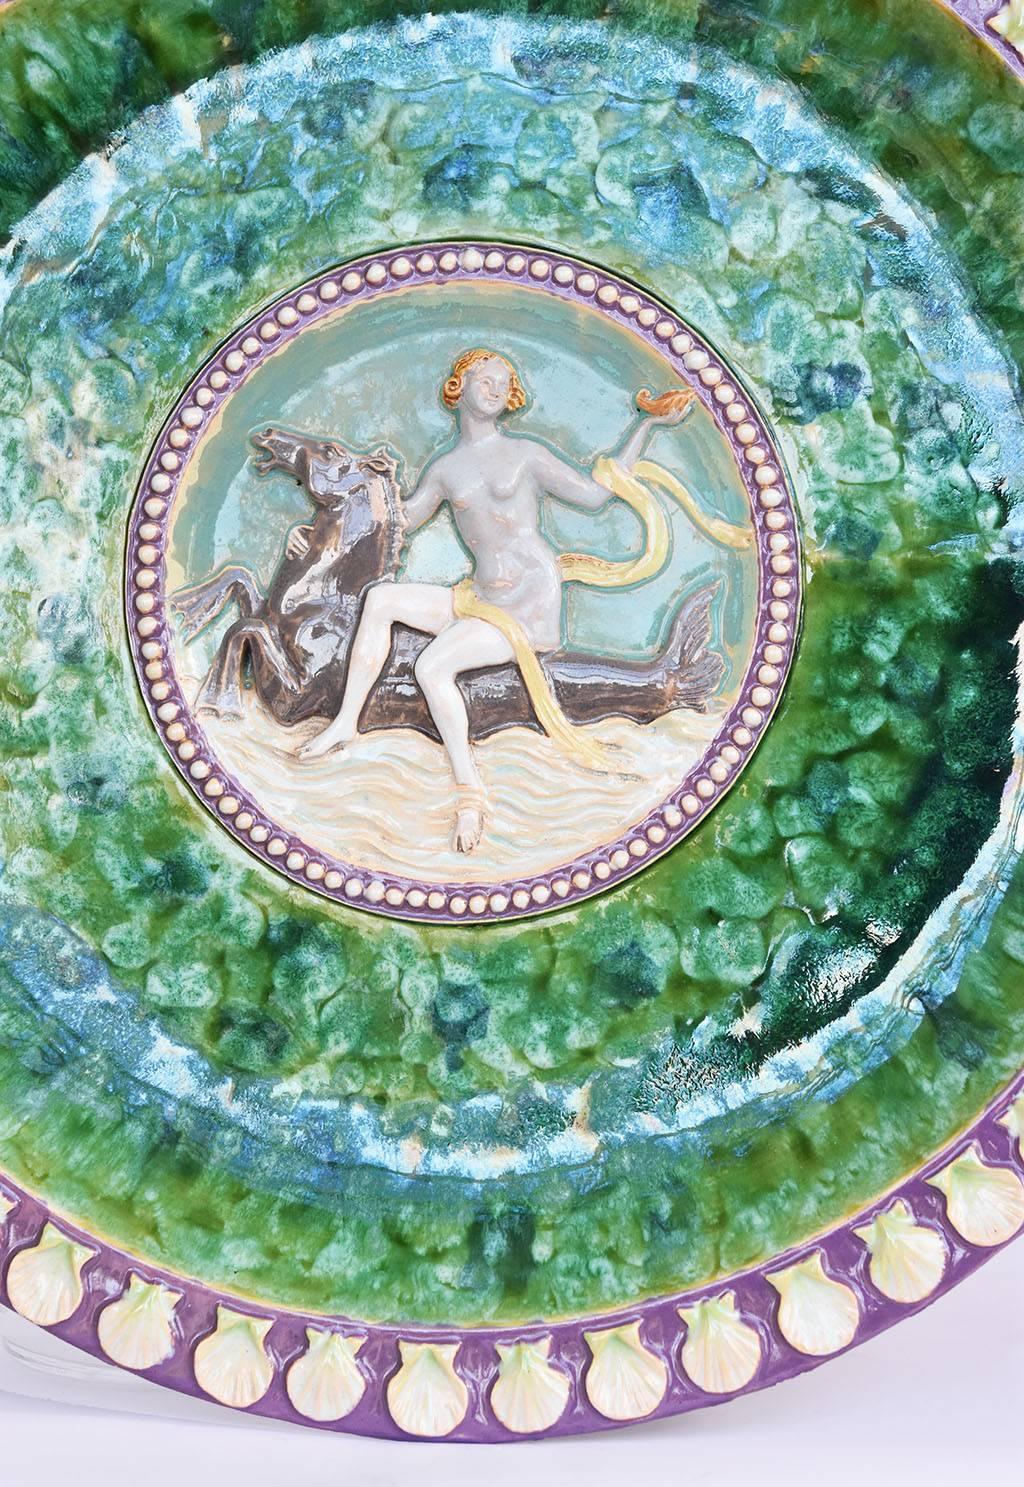 A very rare and striking Austrian terracotta majolica glazed charger, circa 1895
The body decorated in mottled sea green and blue, a central medallion depicting Aphrodite riding a hippocamp within a band of white pearls against a deep lavender